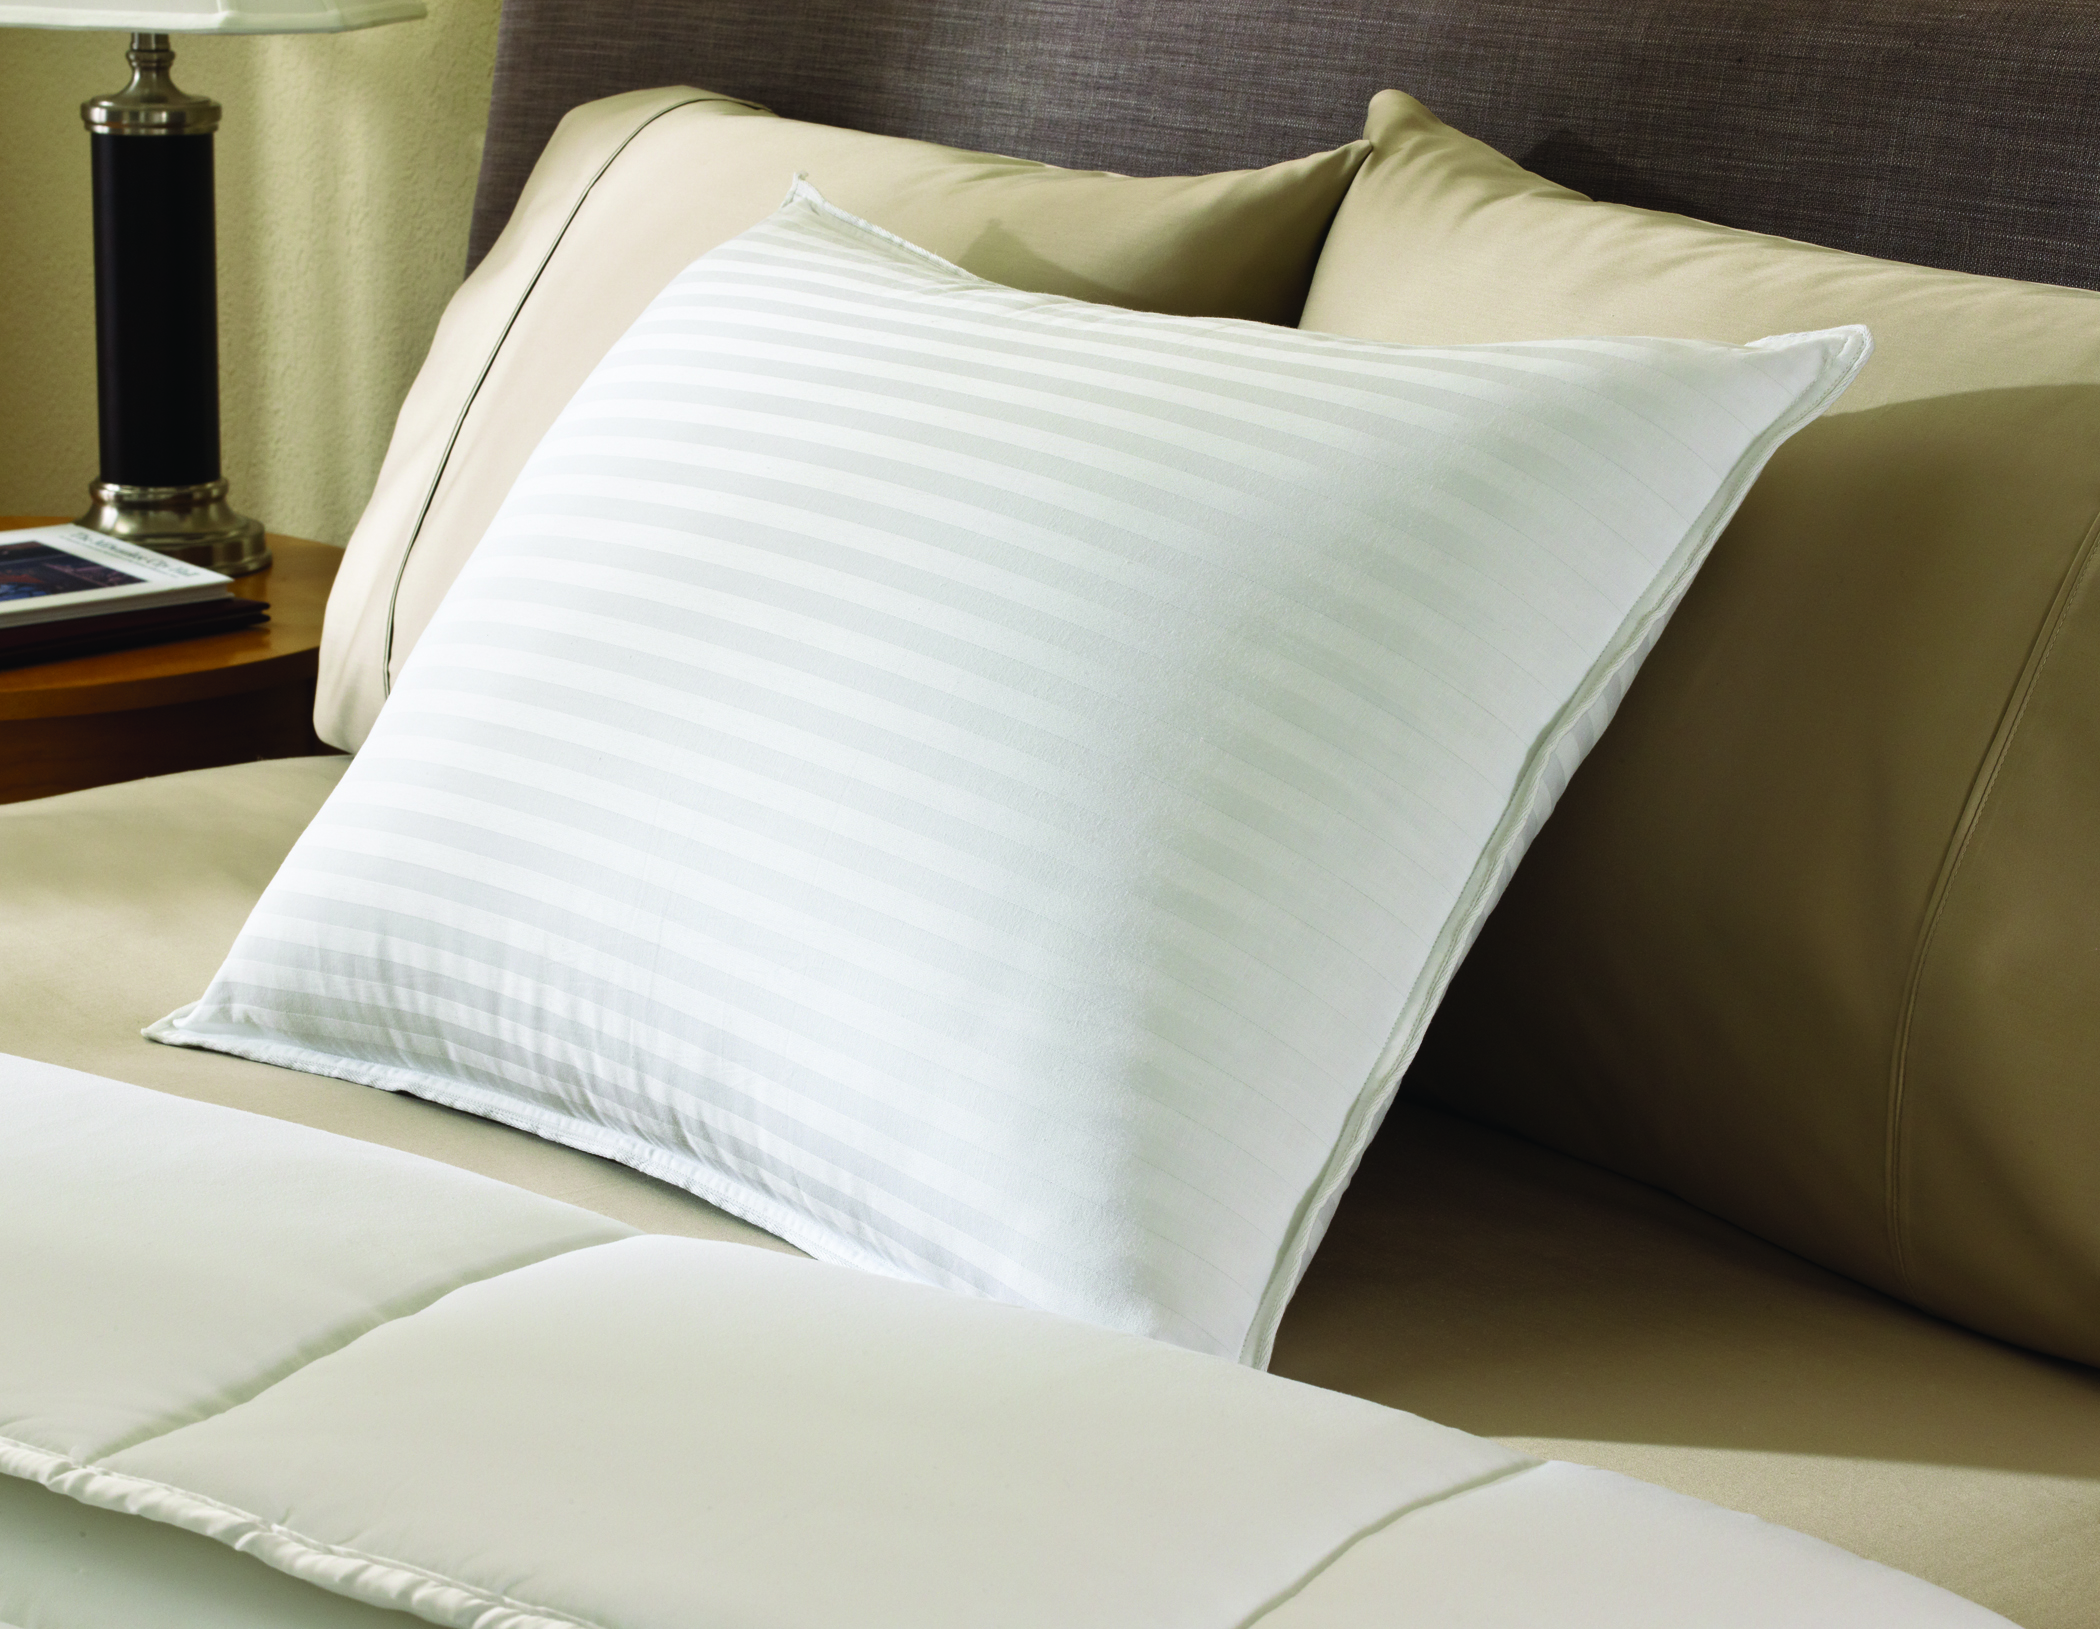 Brilliance® Gel Fiber Pillows from The Pillow Factory® division of Encompass Group, LLC offer a luxurious alternative to down filled pillows.